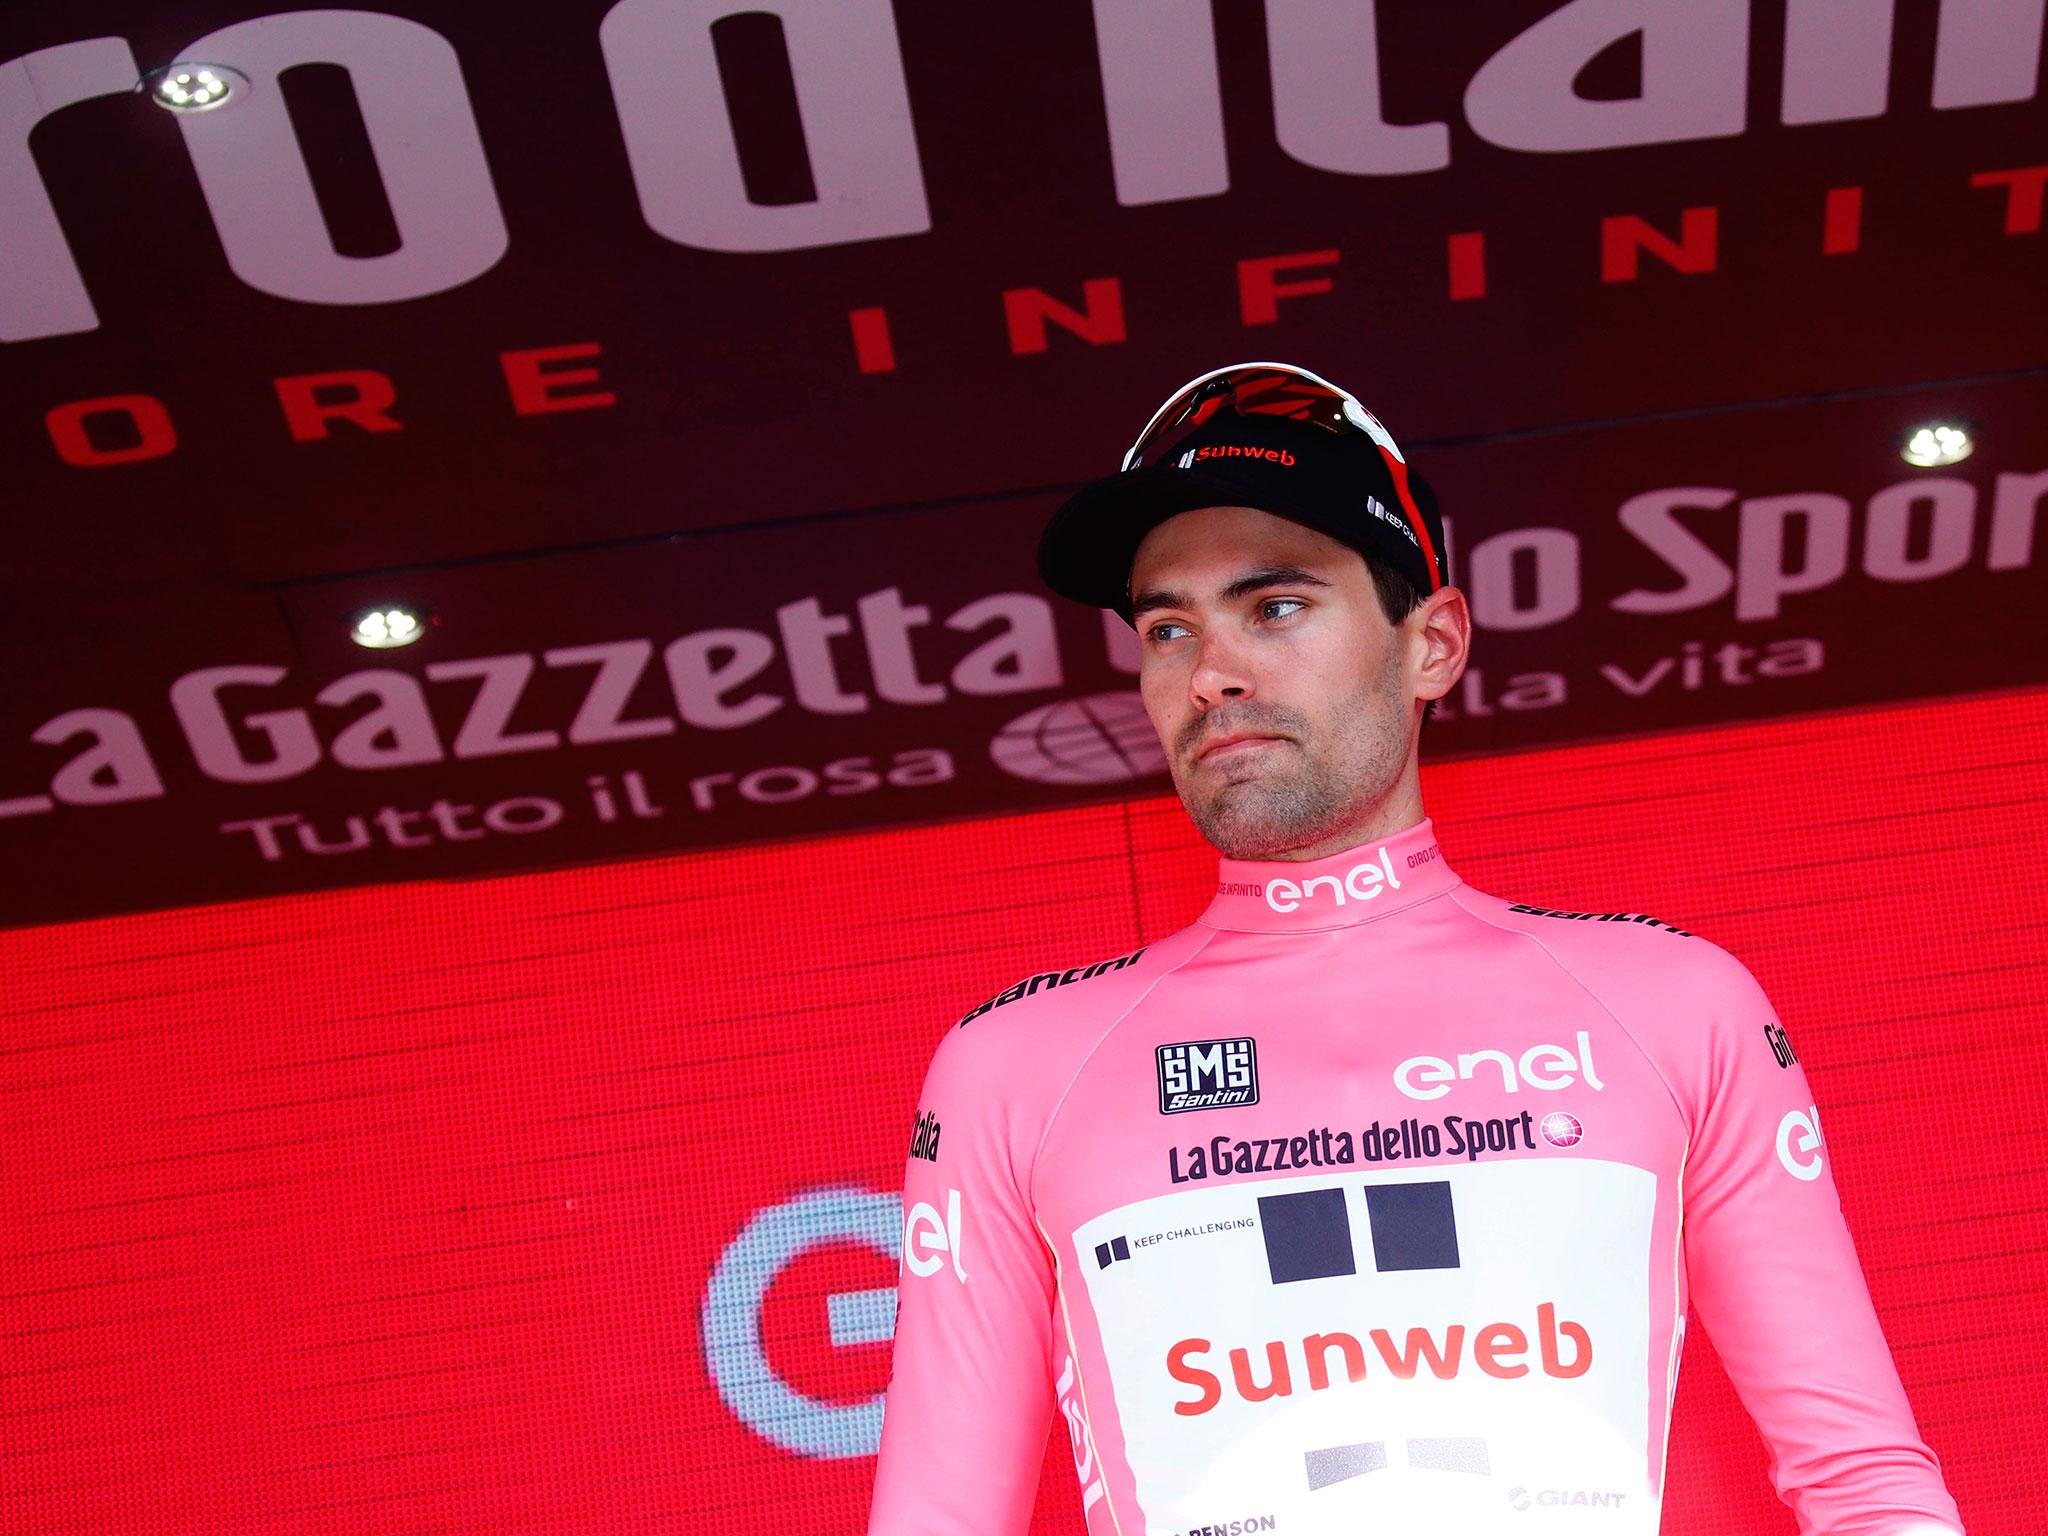 The Dutchman has retained the leader's pink jersey